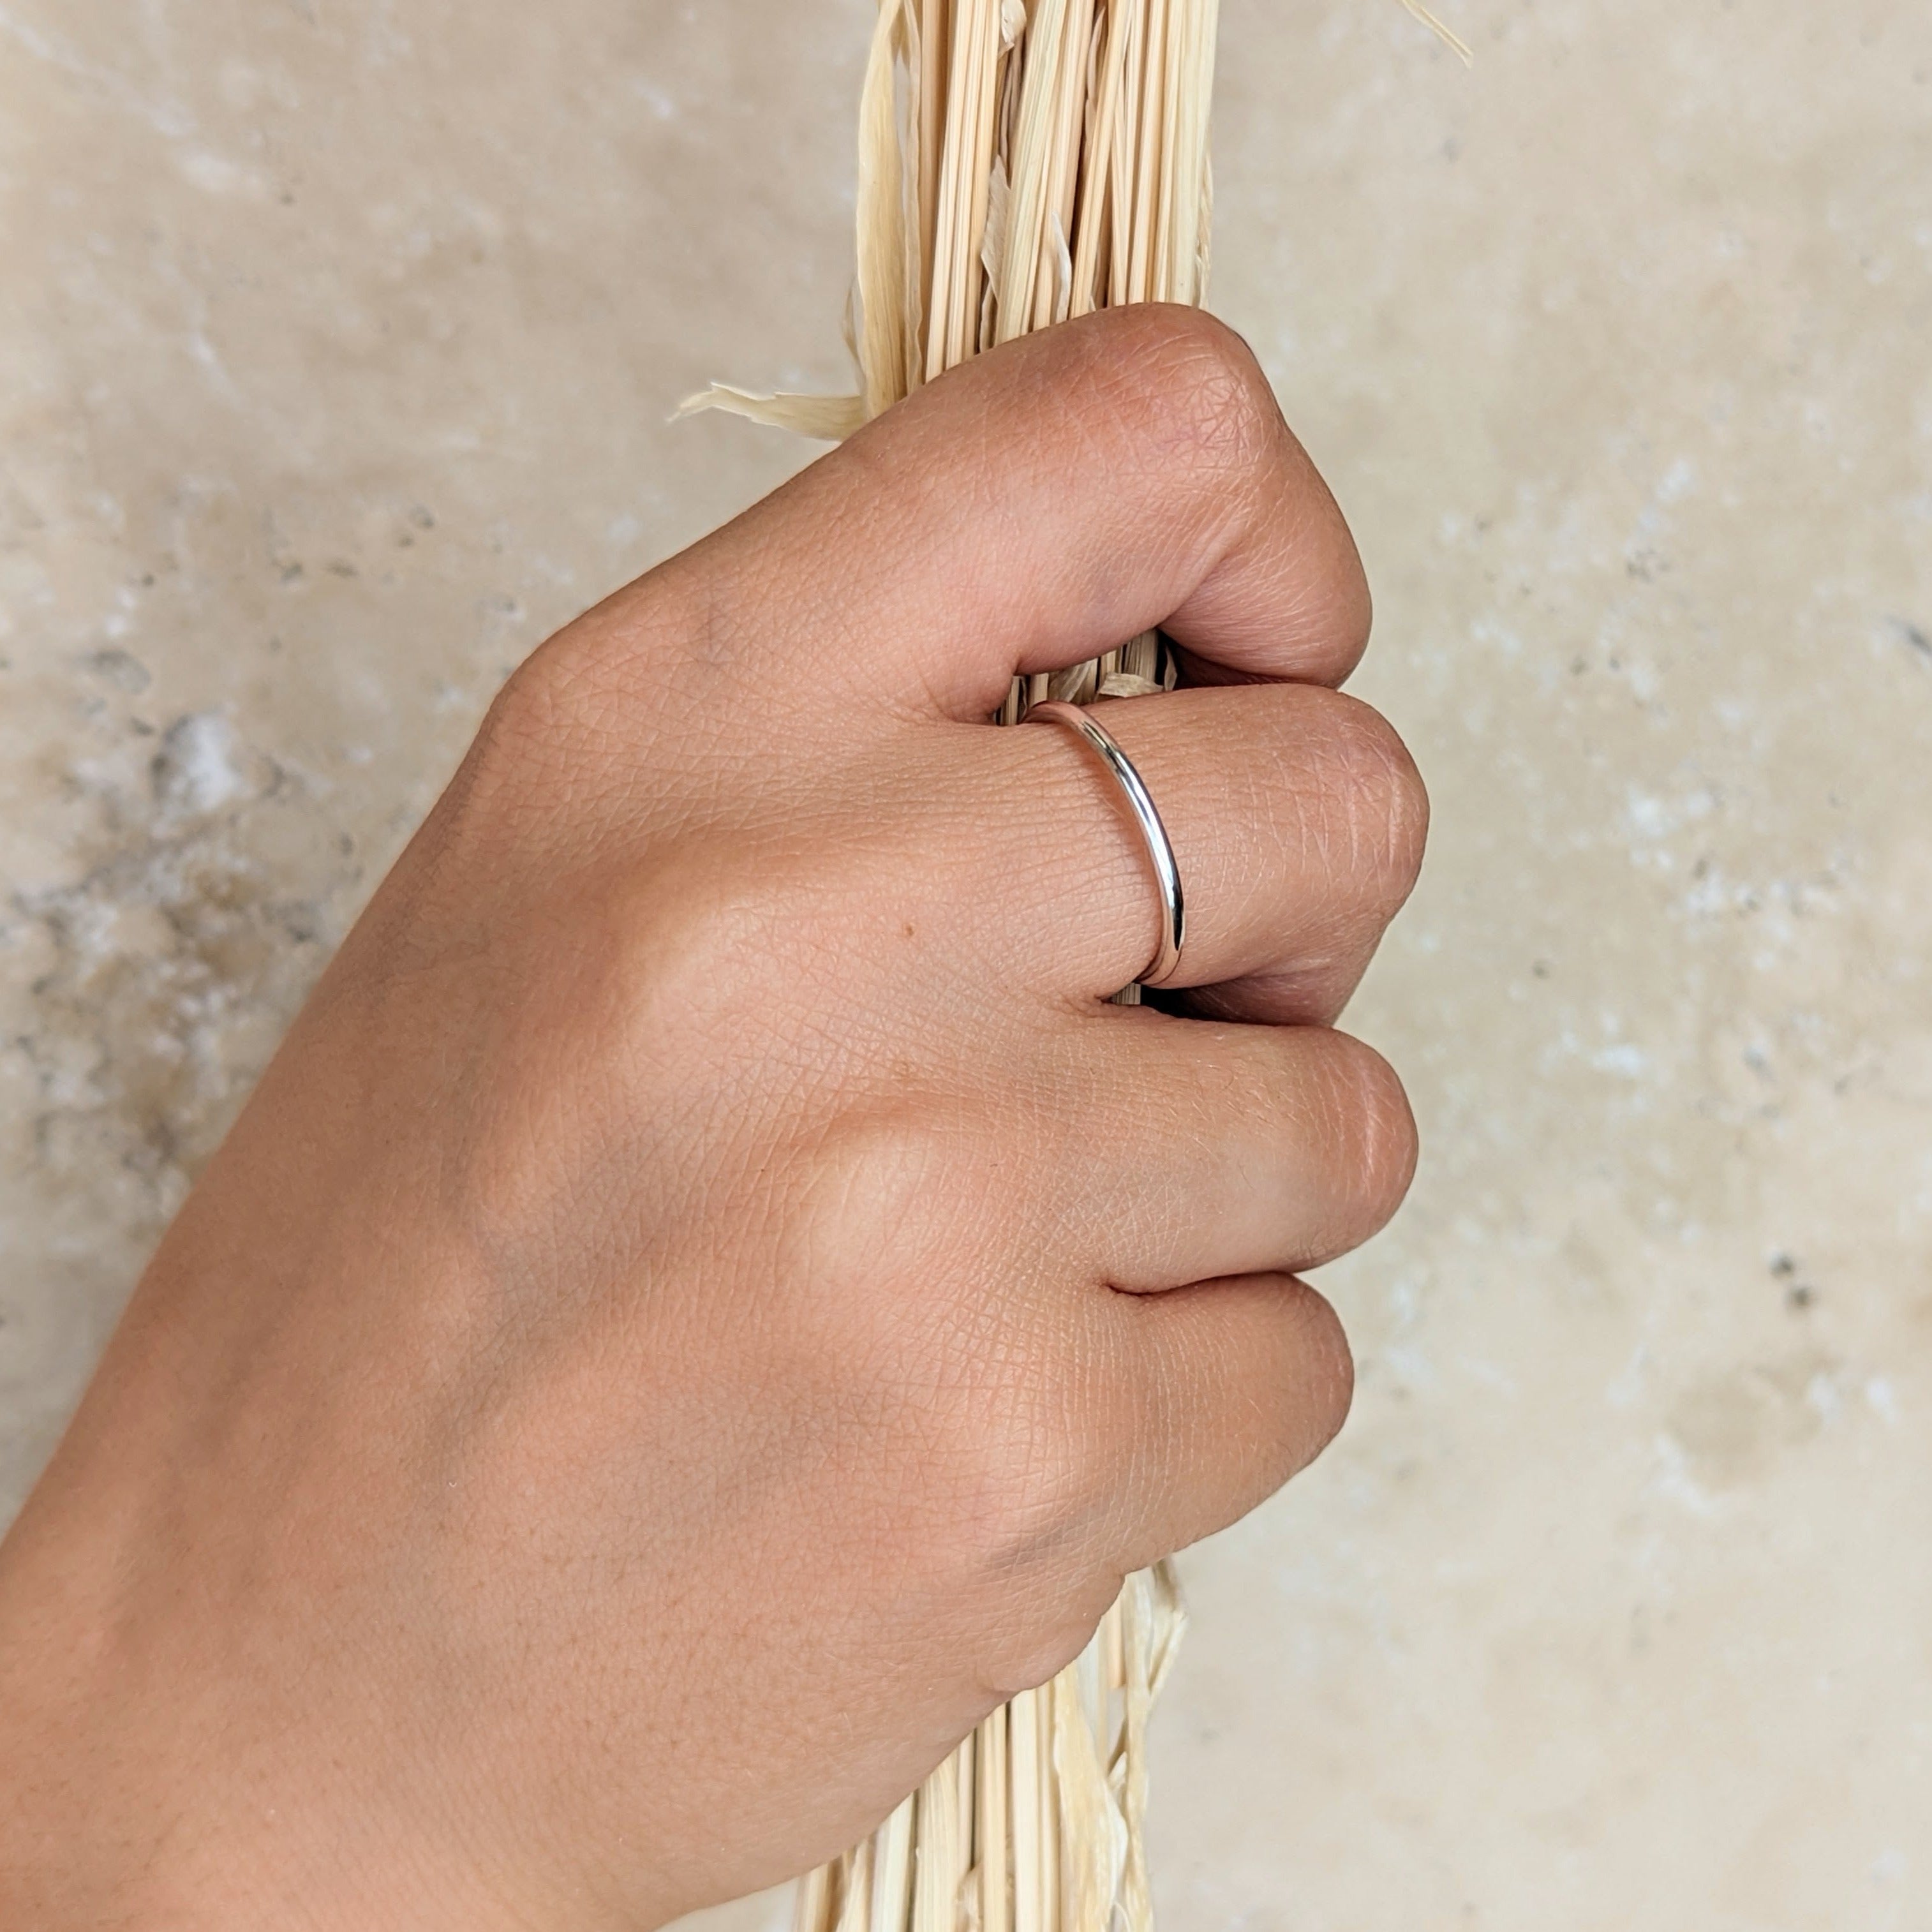 hand holding dried grass and wearing a single thin silver ring